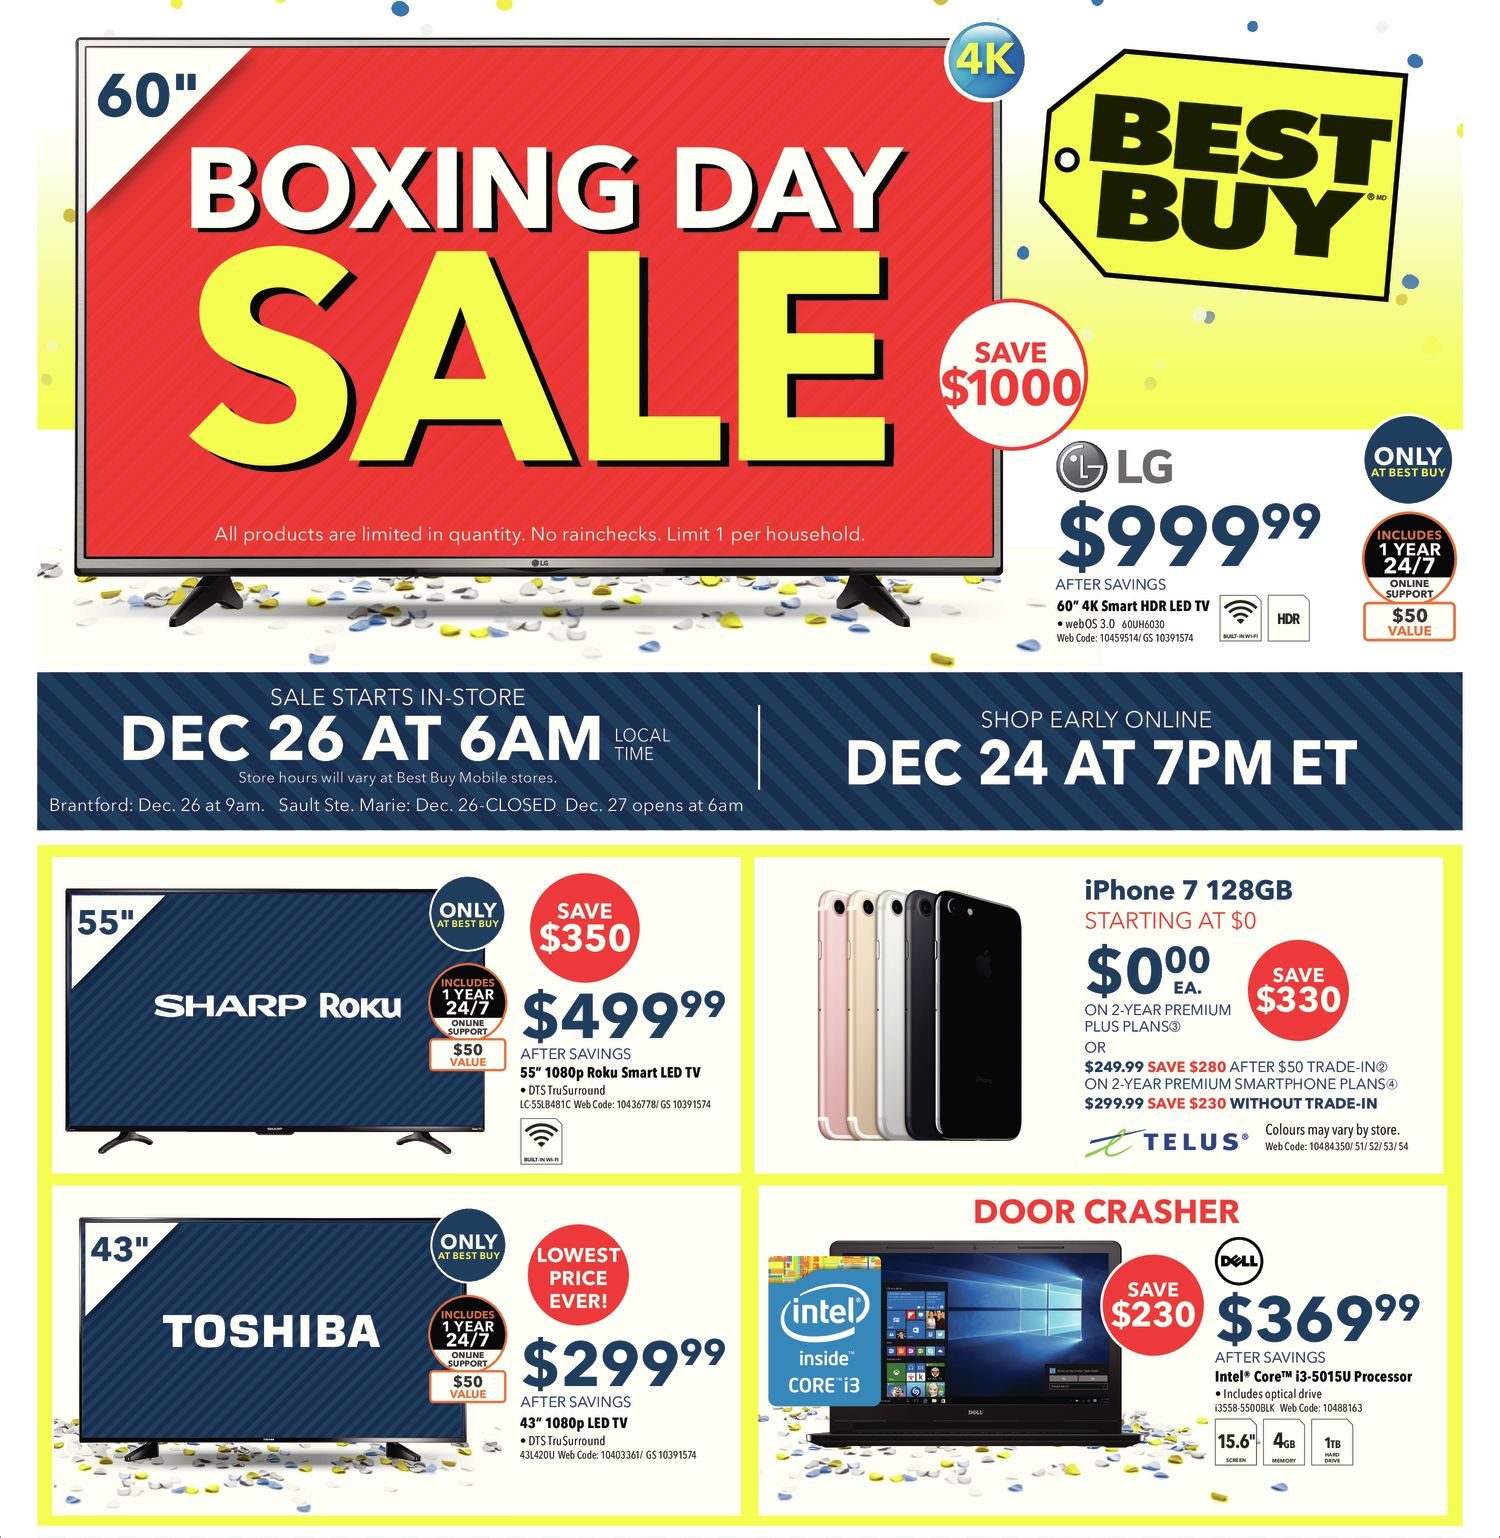 Best Buy Weekly Flyer - Boxing Day Sale - Dec 25 – 29 